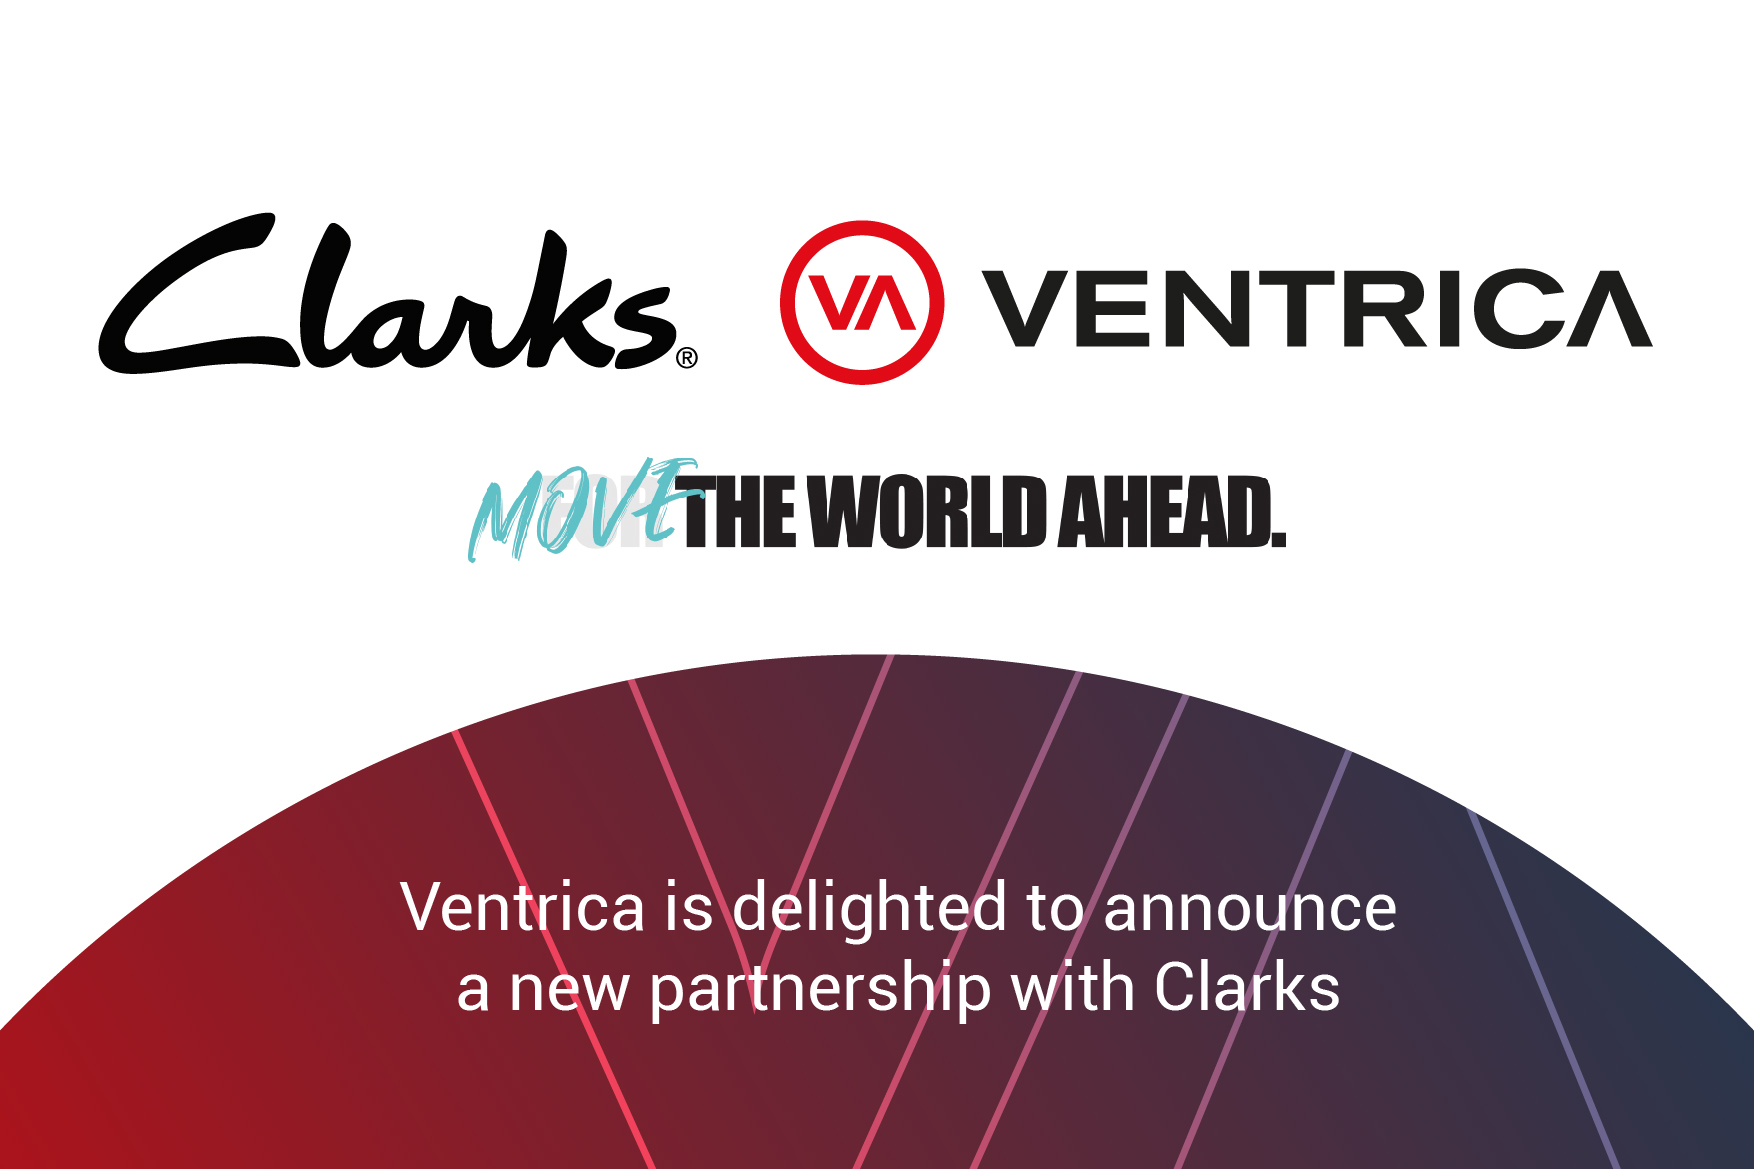 concepto matrimonio Monumental Ventrica offers the legendary global footwear brand Clarks enhanced  customer support. - Contact Centre Monthly